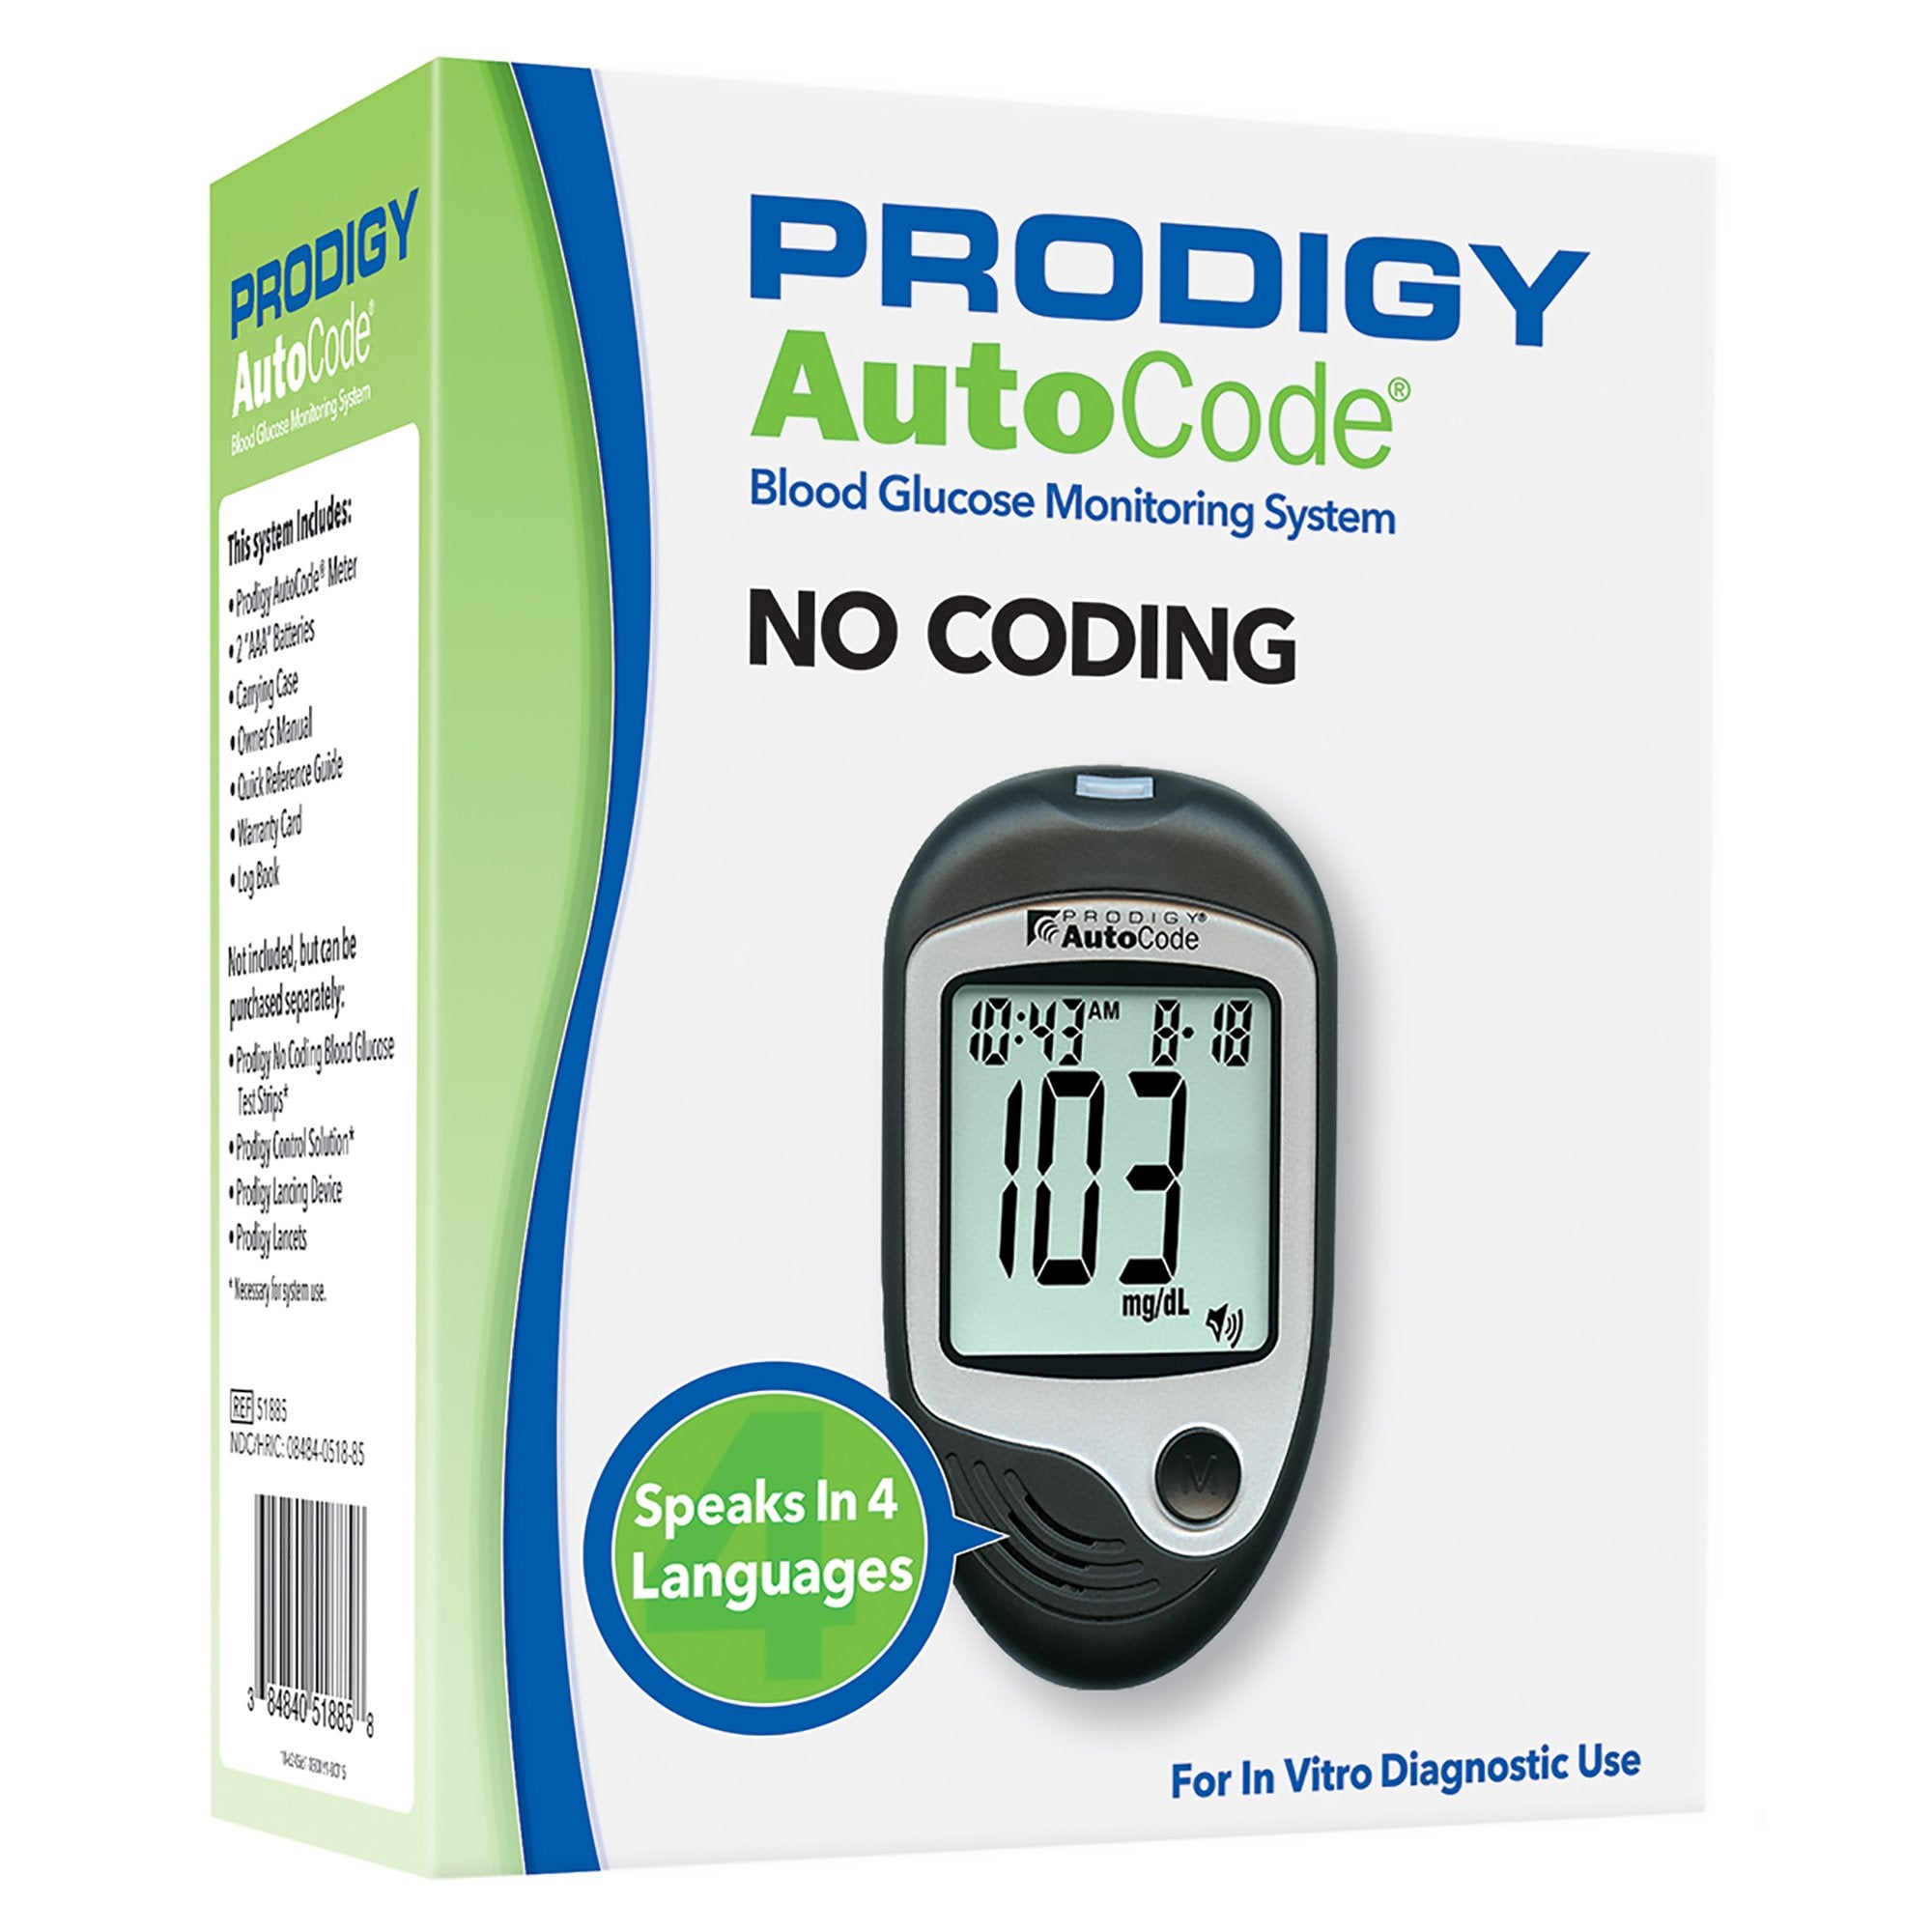 Blood Glucose Meter Prodigy 7 Second Results Stores up to 450 Results No Coding Required